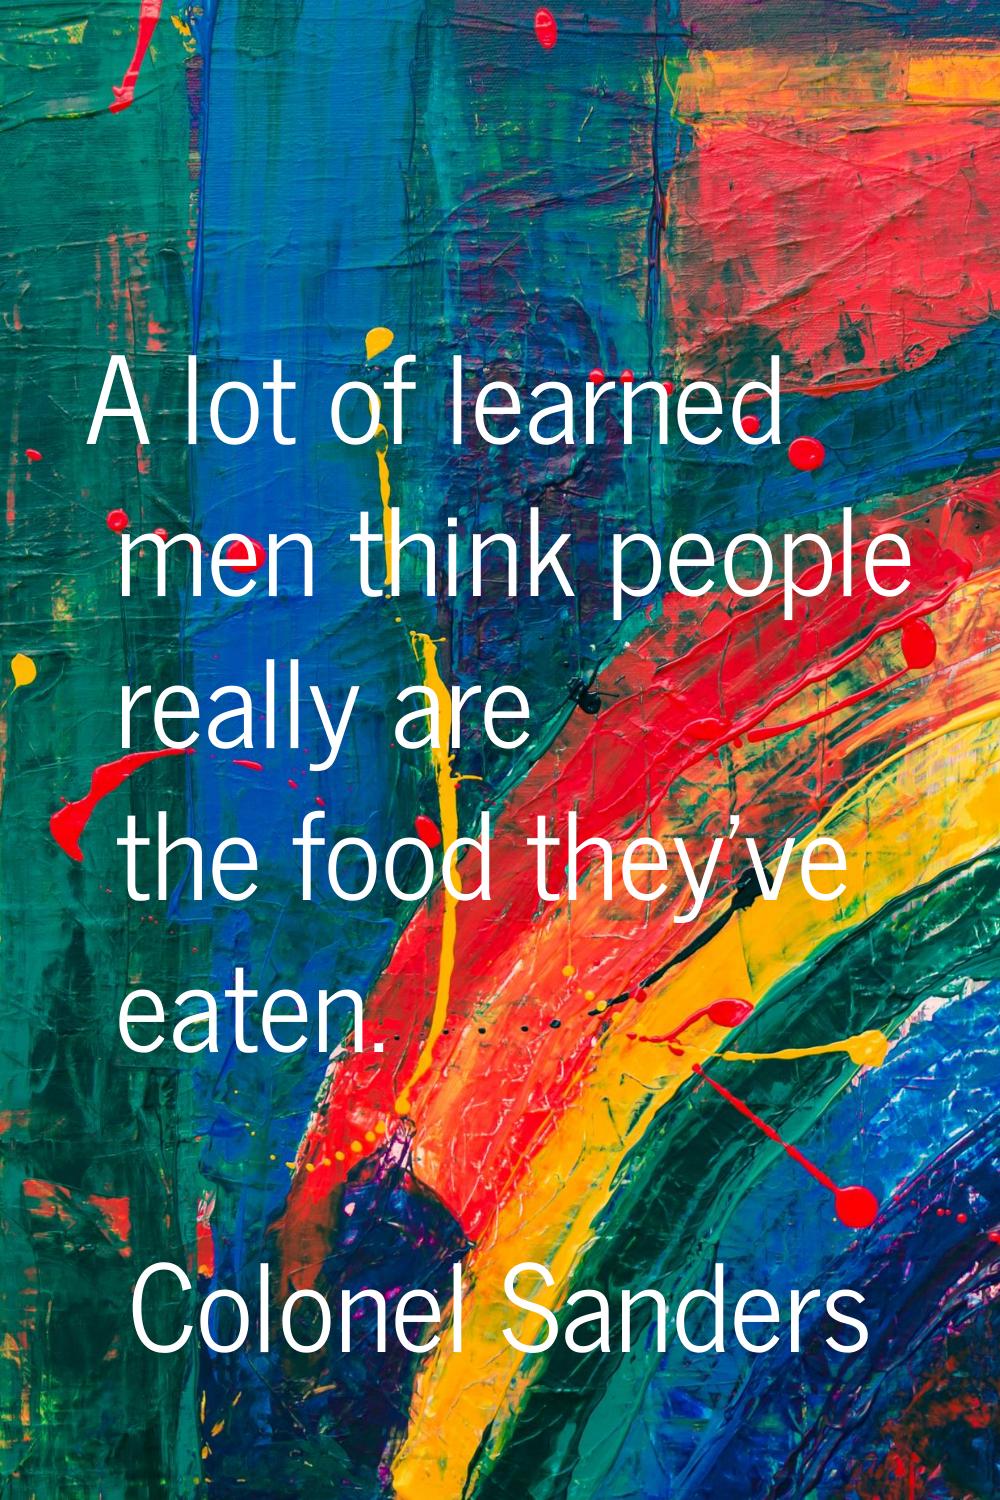 A lot of learned men think people really are the food they've eaten.